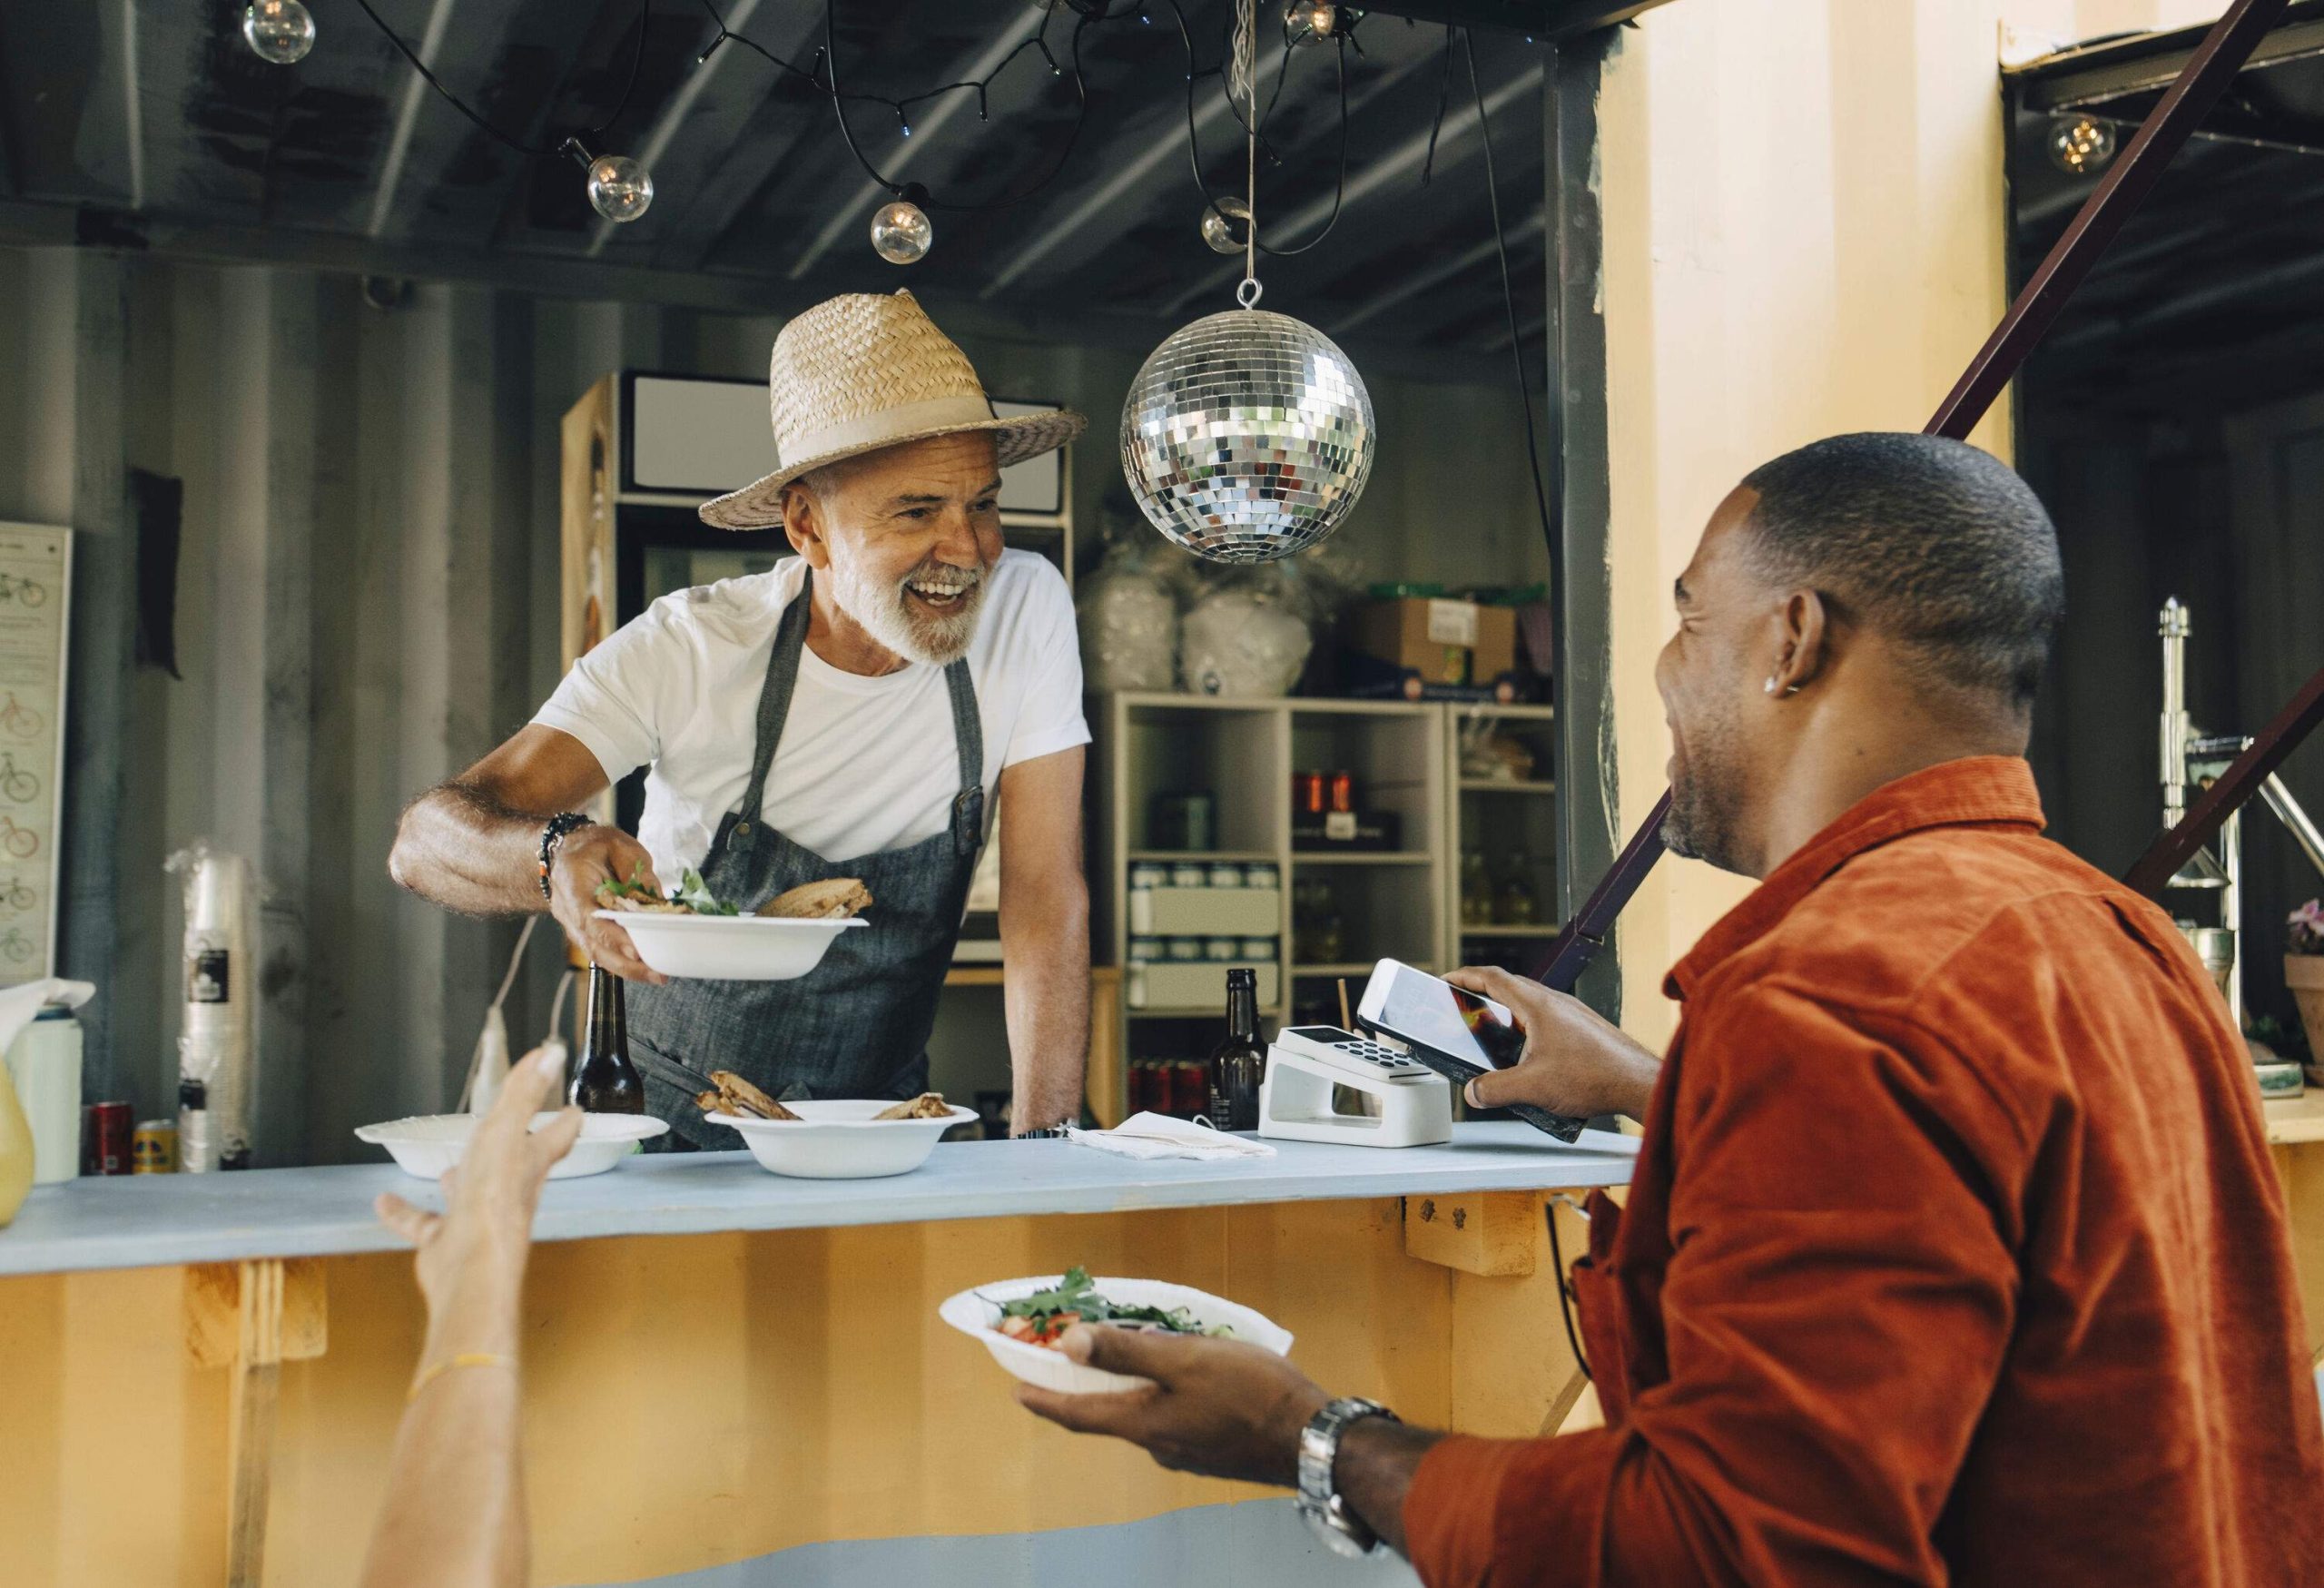 An elderly man in a straw hat serves food to a man in a brown shirt in the food truck counter.